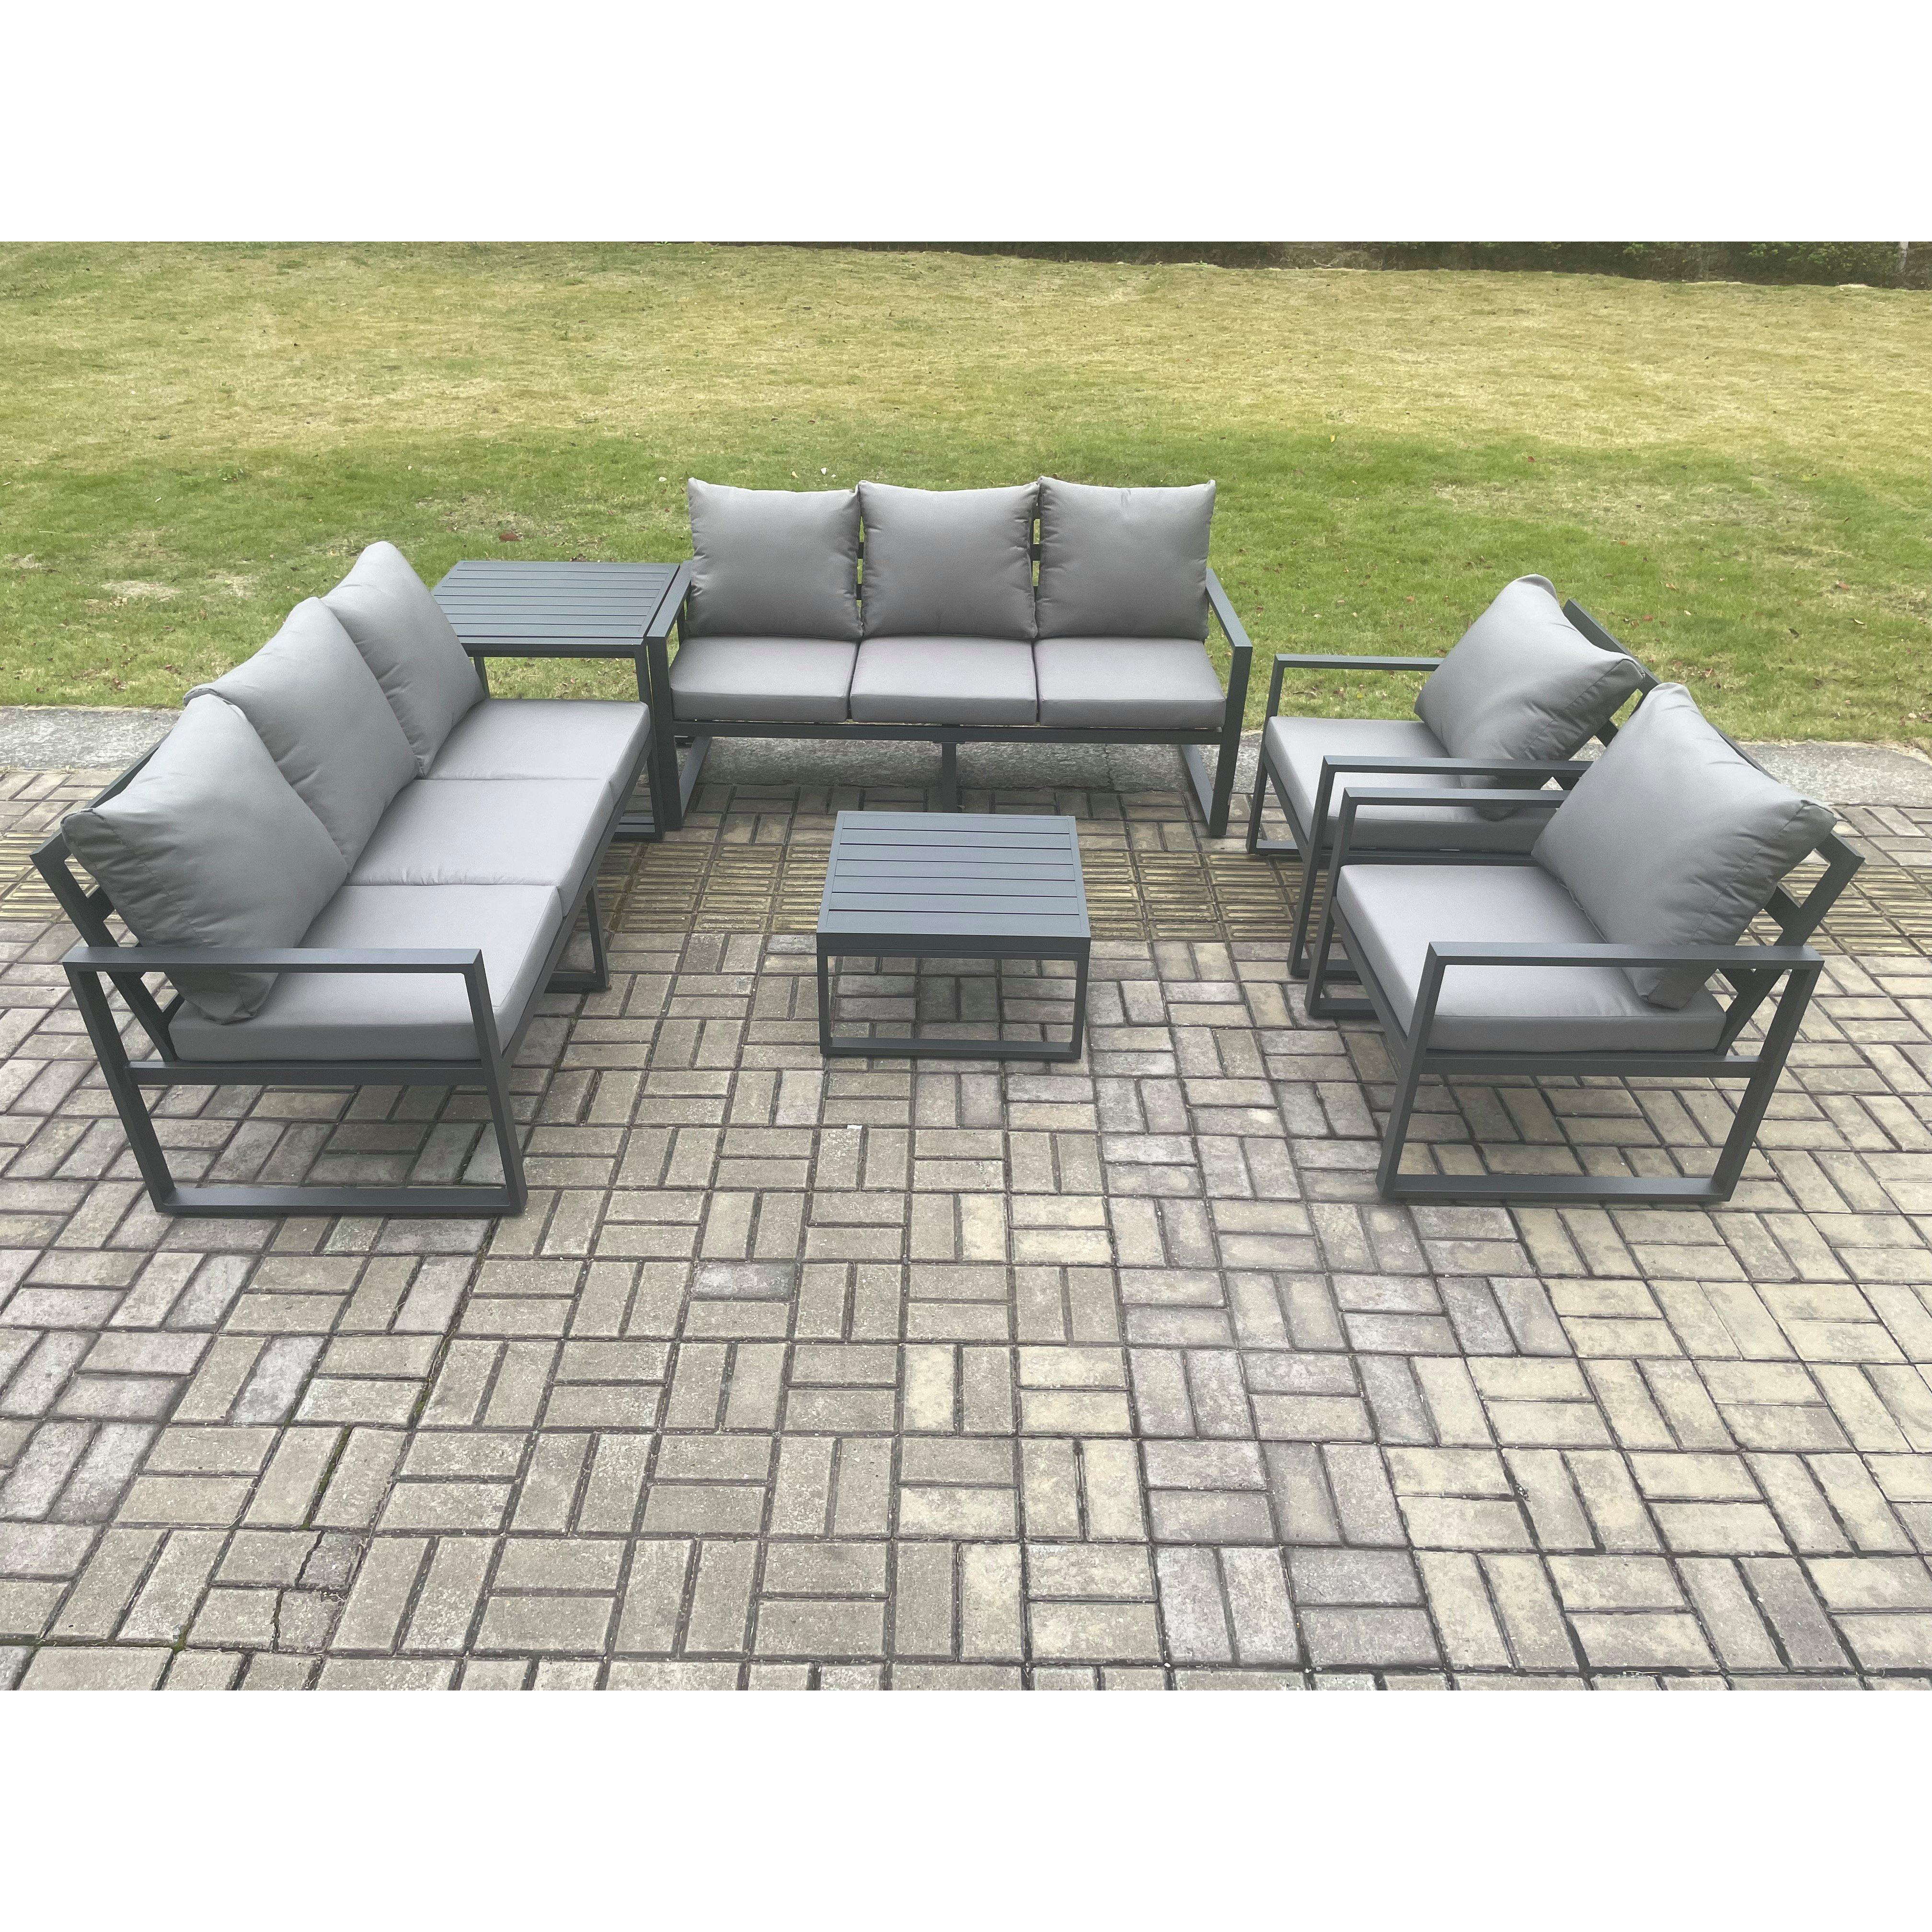 Aluminium Outdoor Lounge Sofa Set Garden Furniture Sets with Square Coffee Table 2 Chairs Side Table Dark Grey 8 Seater - image 1